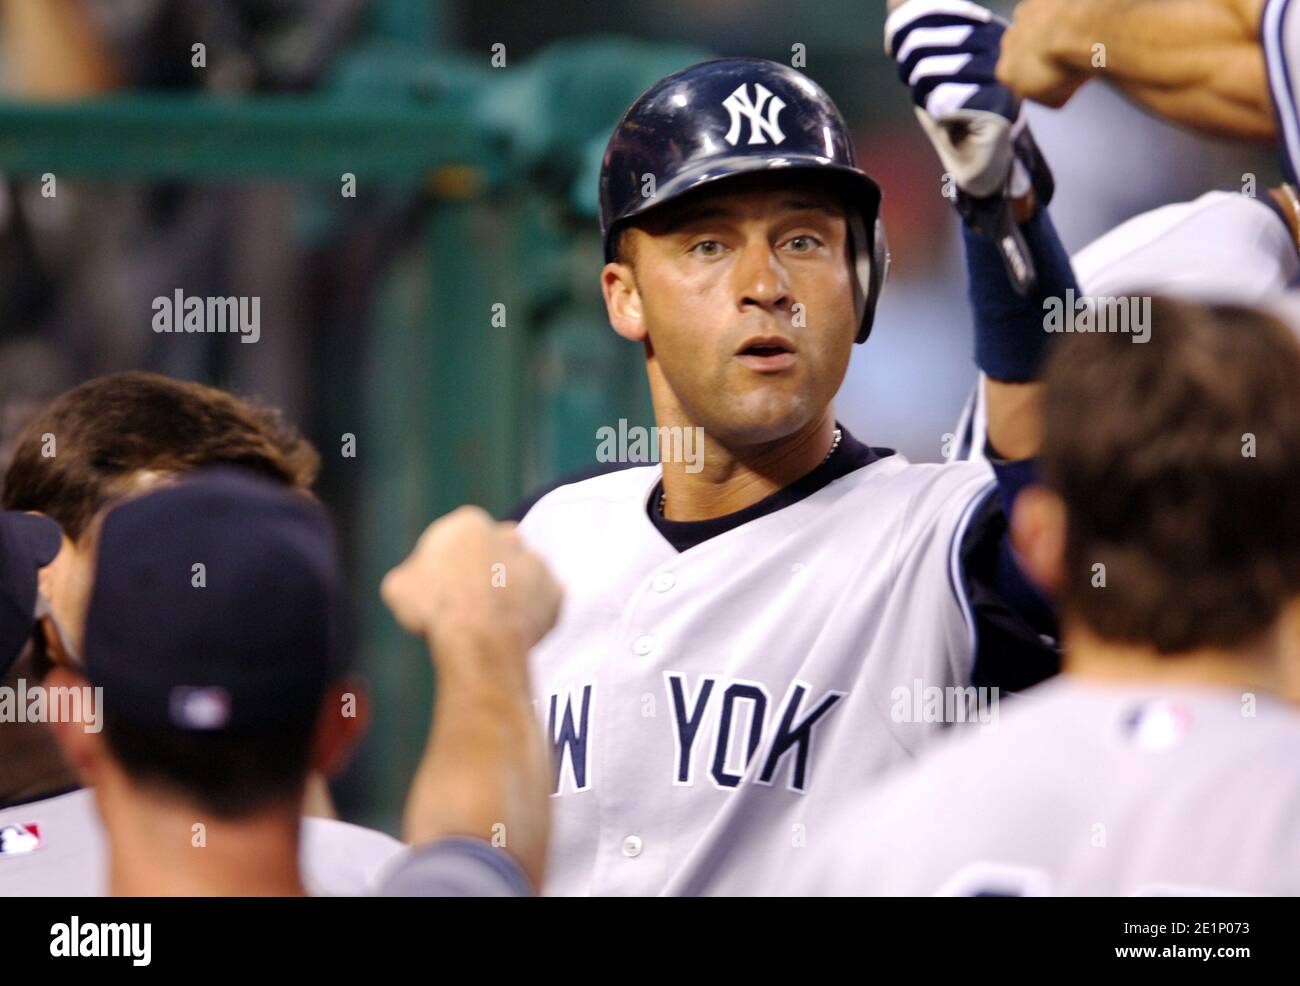 Derek Jeter of the New York Yankees is congratulated by teammates after scoring in the fifth inning of 8-6 loss to the Los Angeles Angels of Anaheim a Stock Photo